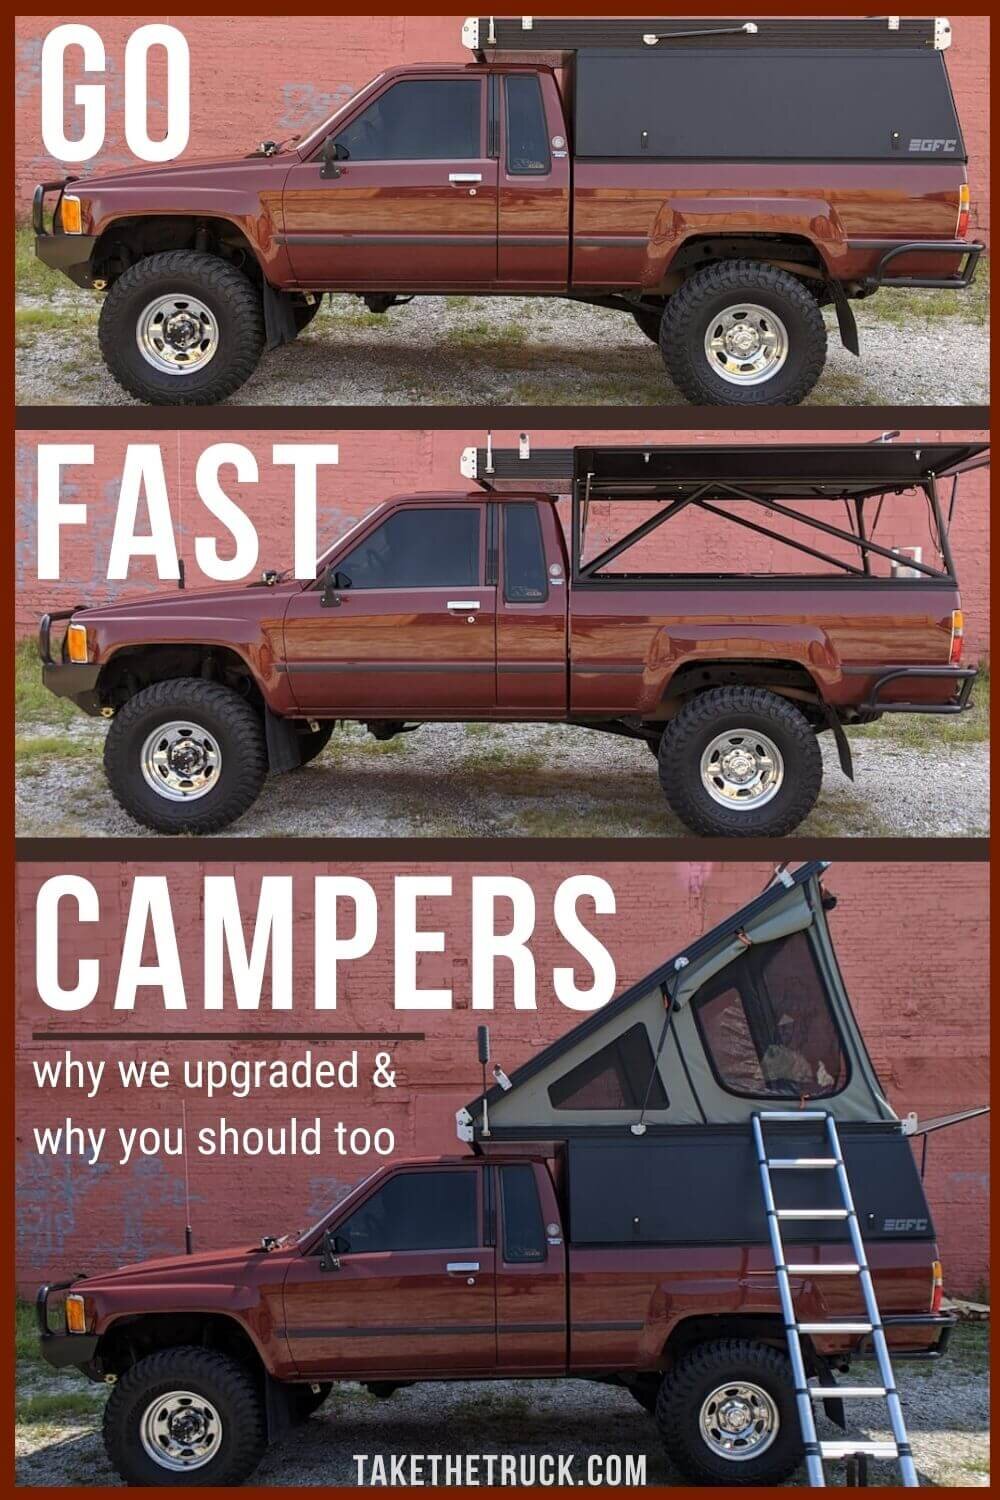 We upped our truck bed camping game and got a wedge truck camper! Read this post for 5 reasons we landed on Go Fast Campers when wanting to upgrade to a wedge camper for our Toyota.